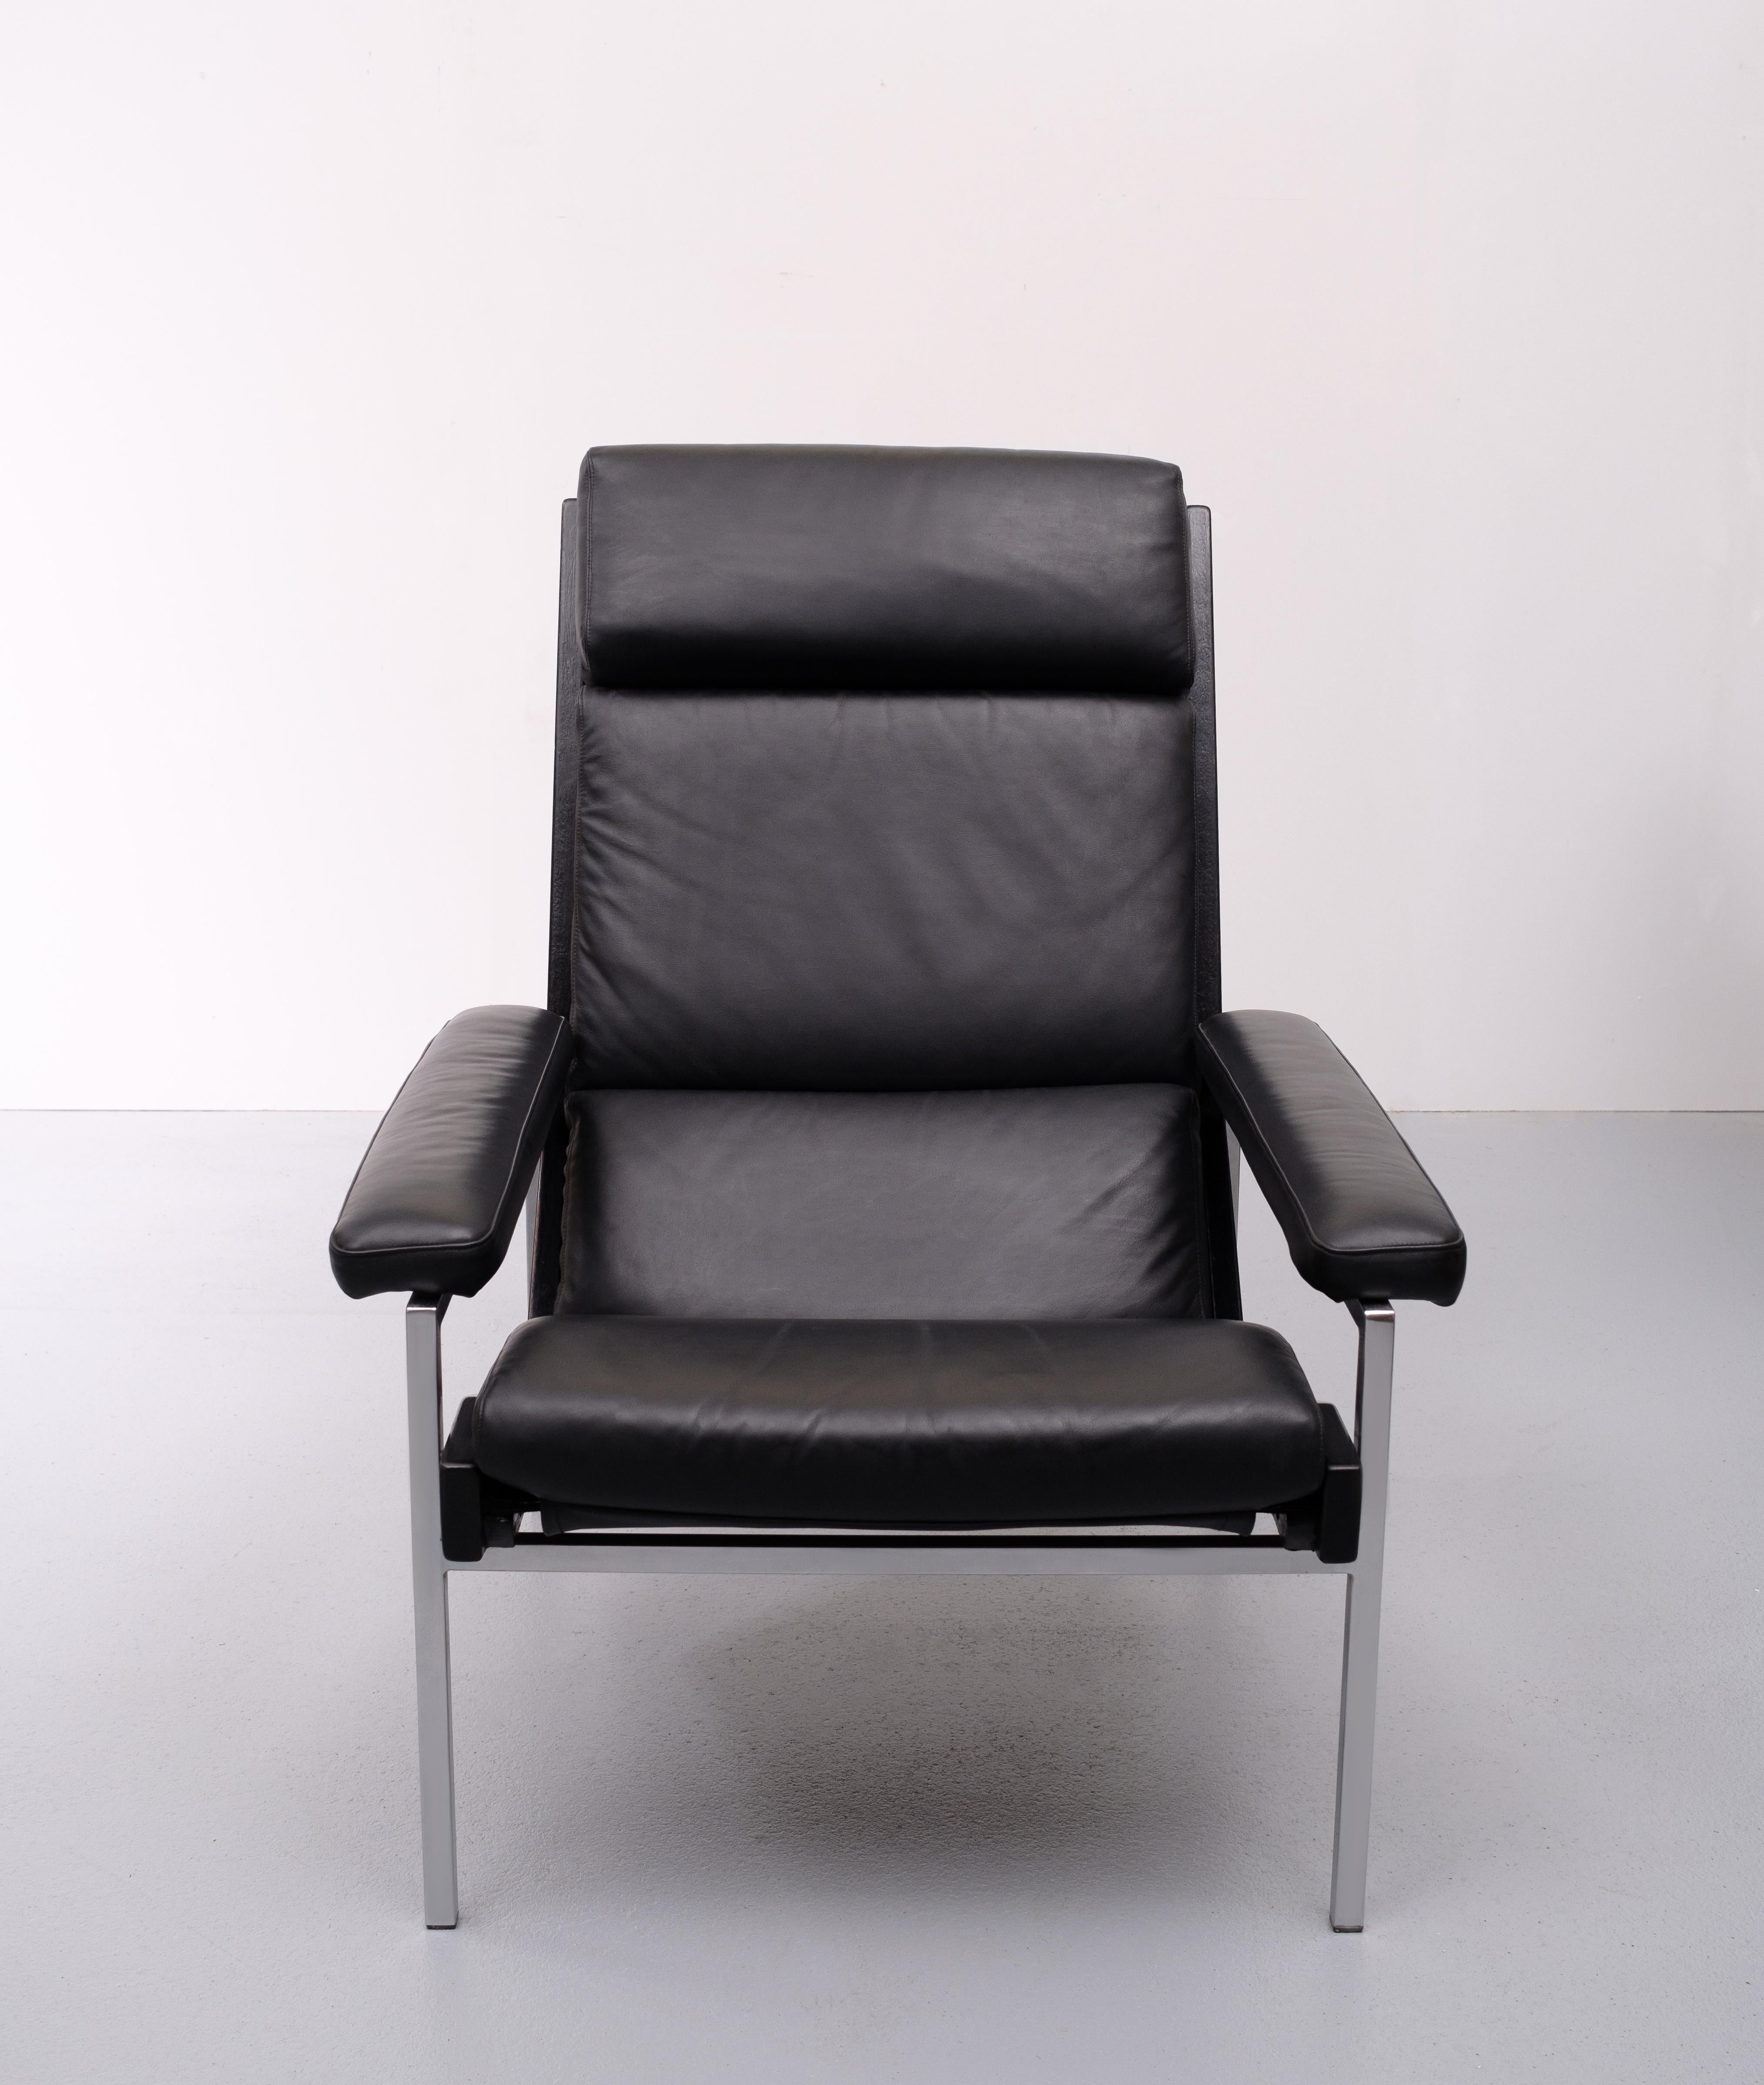 Superb lounge chair and footstool. Design by Rob Parry model lotus produced by Gelderland 1960s Holland
Square chrome metal frame, the lounge chair comes with a new smooth black leather upholstery. Professional done.
Rare to find this lounge chair